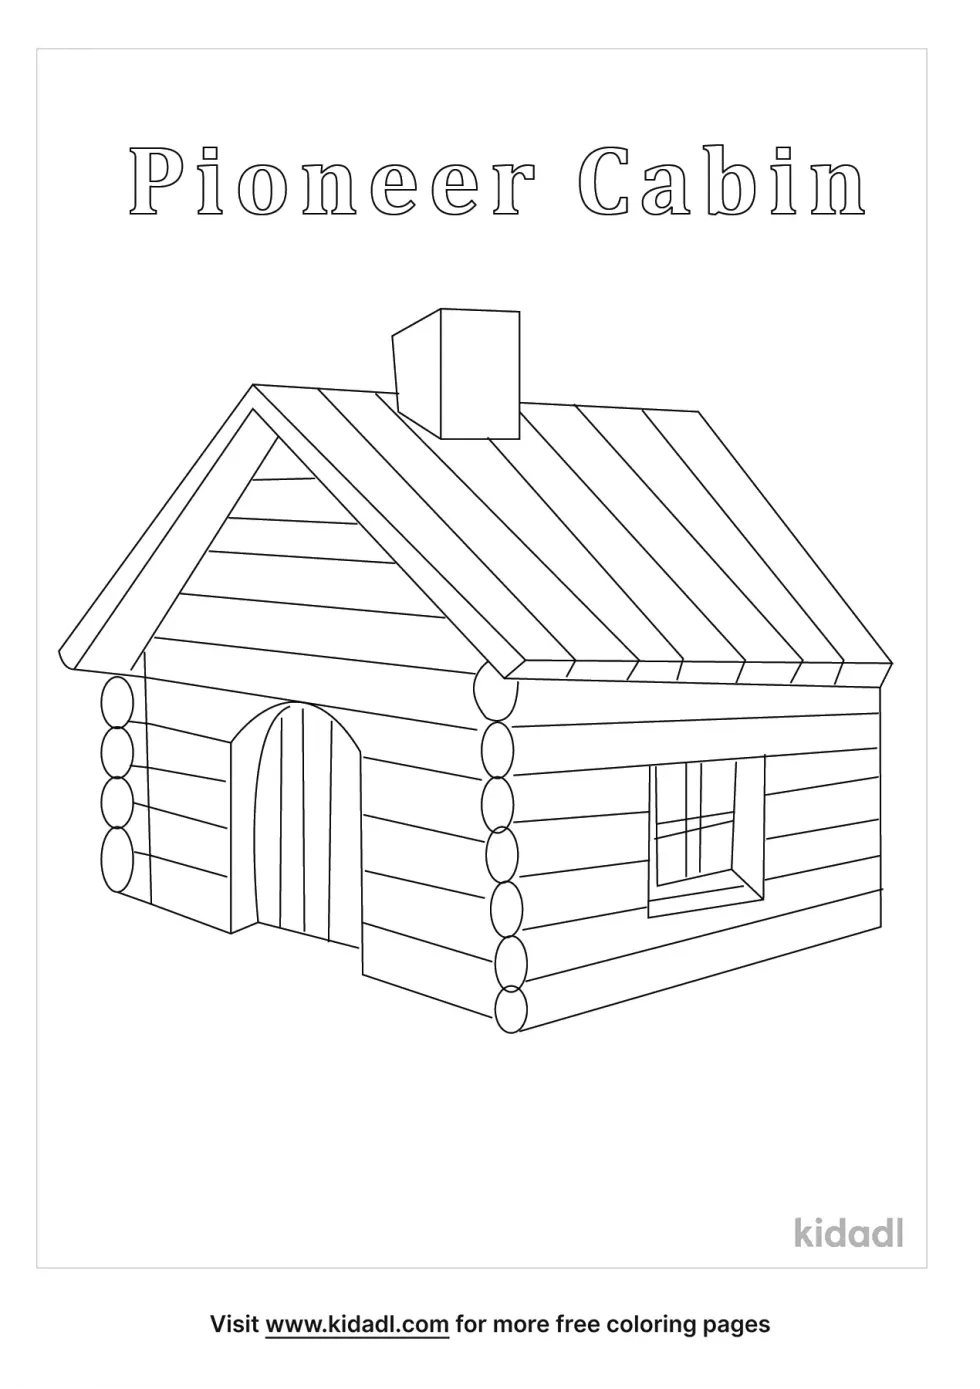 Pioneer Cabin Coloring Page